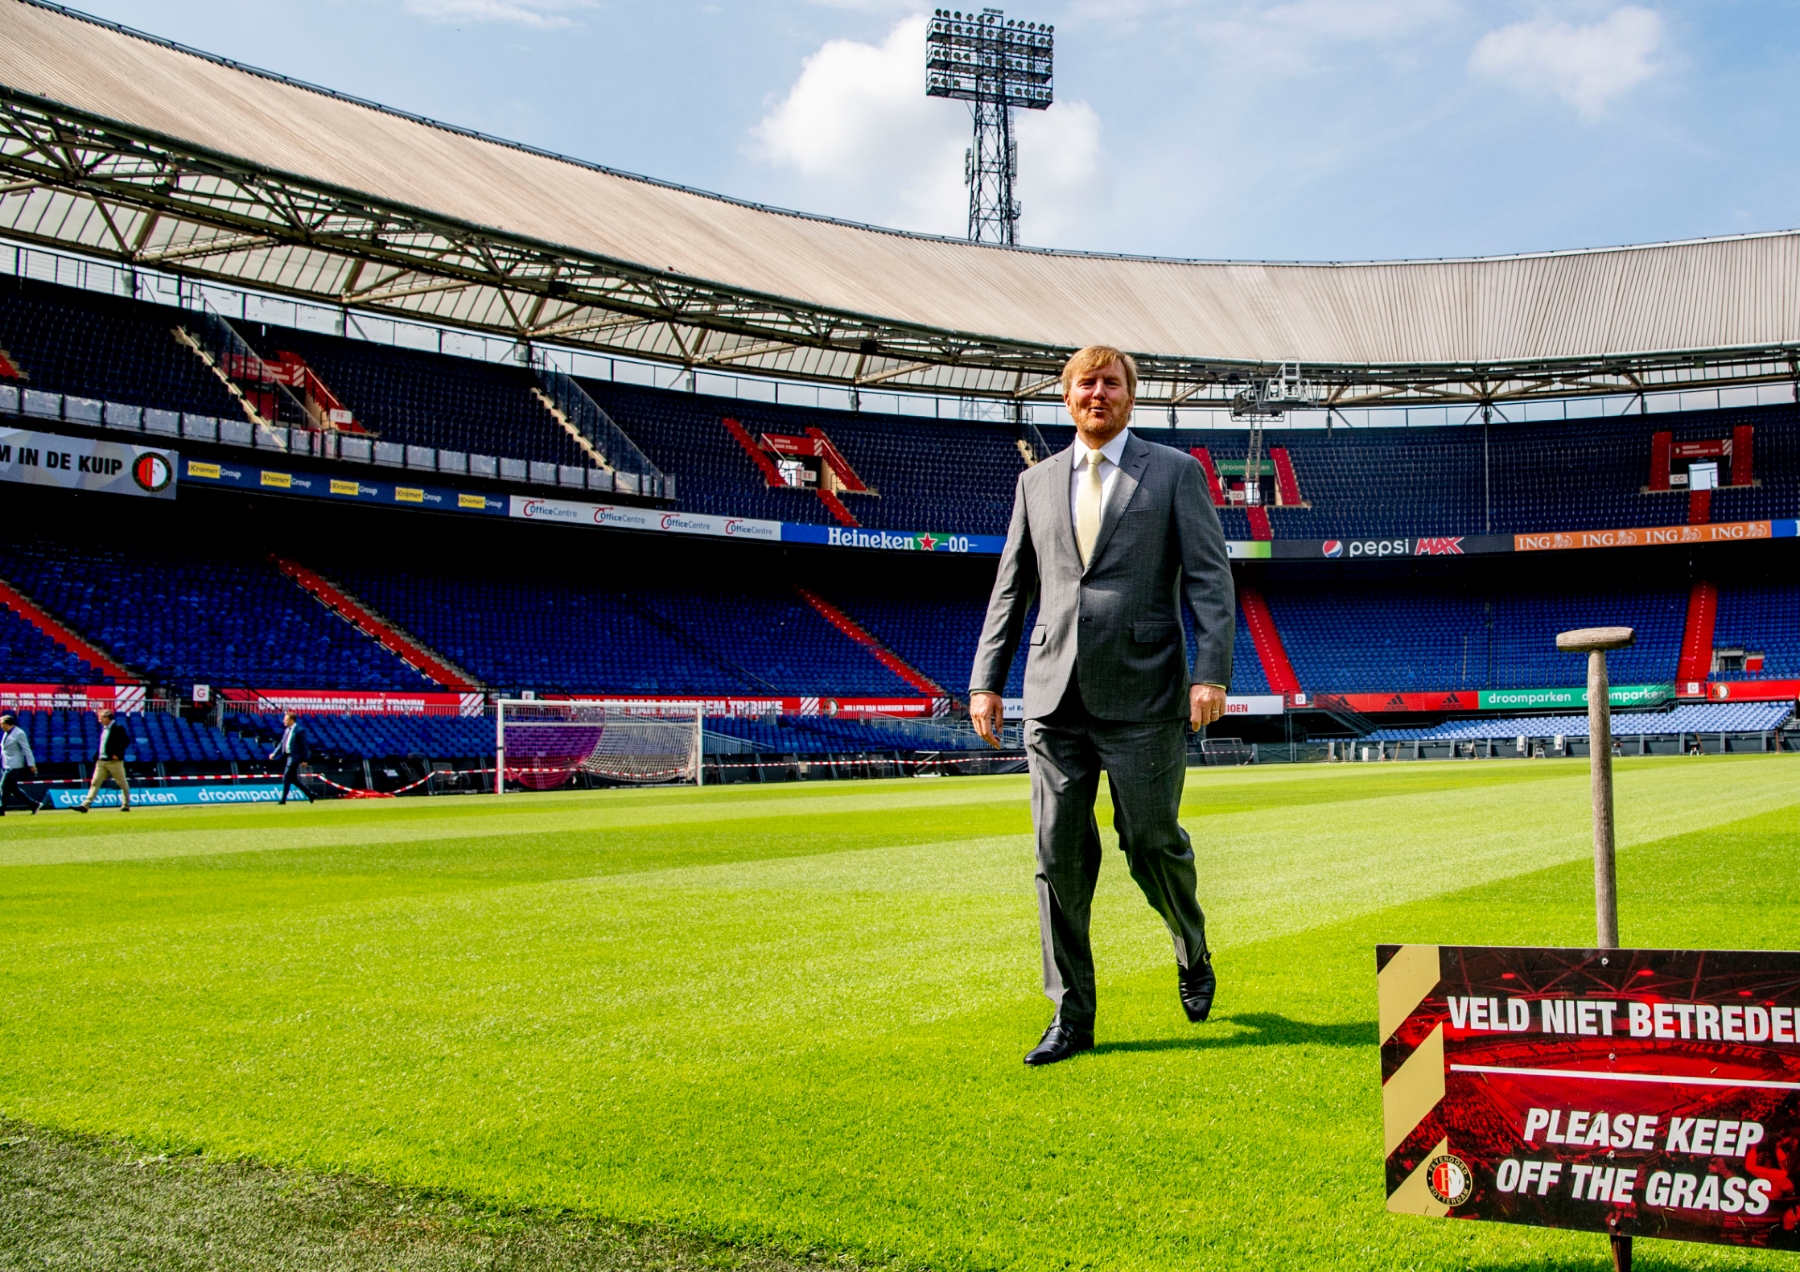 King Willem-Alexander walking on the pitch at Feyenoord past a sign saying 'keep off the grass'